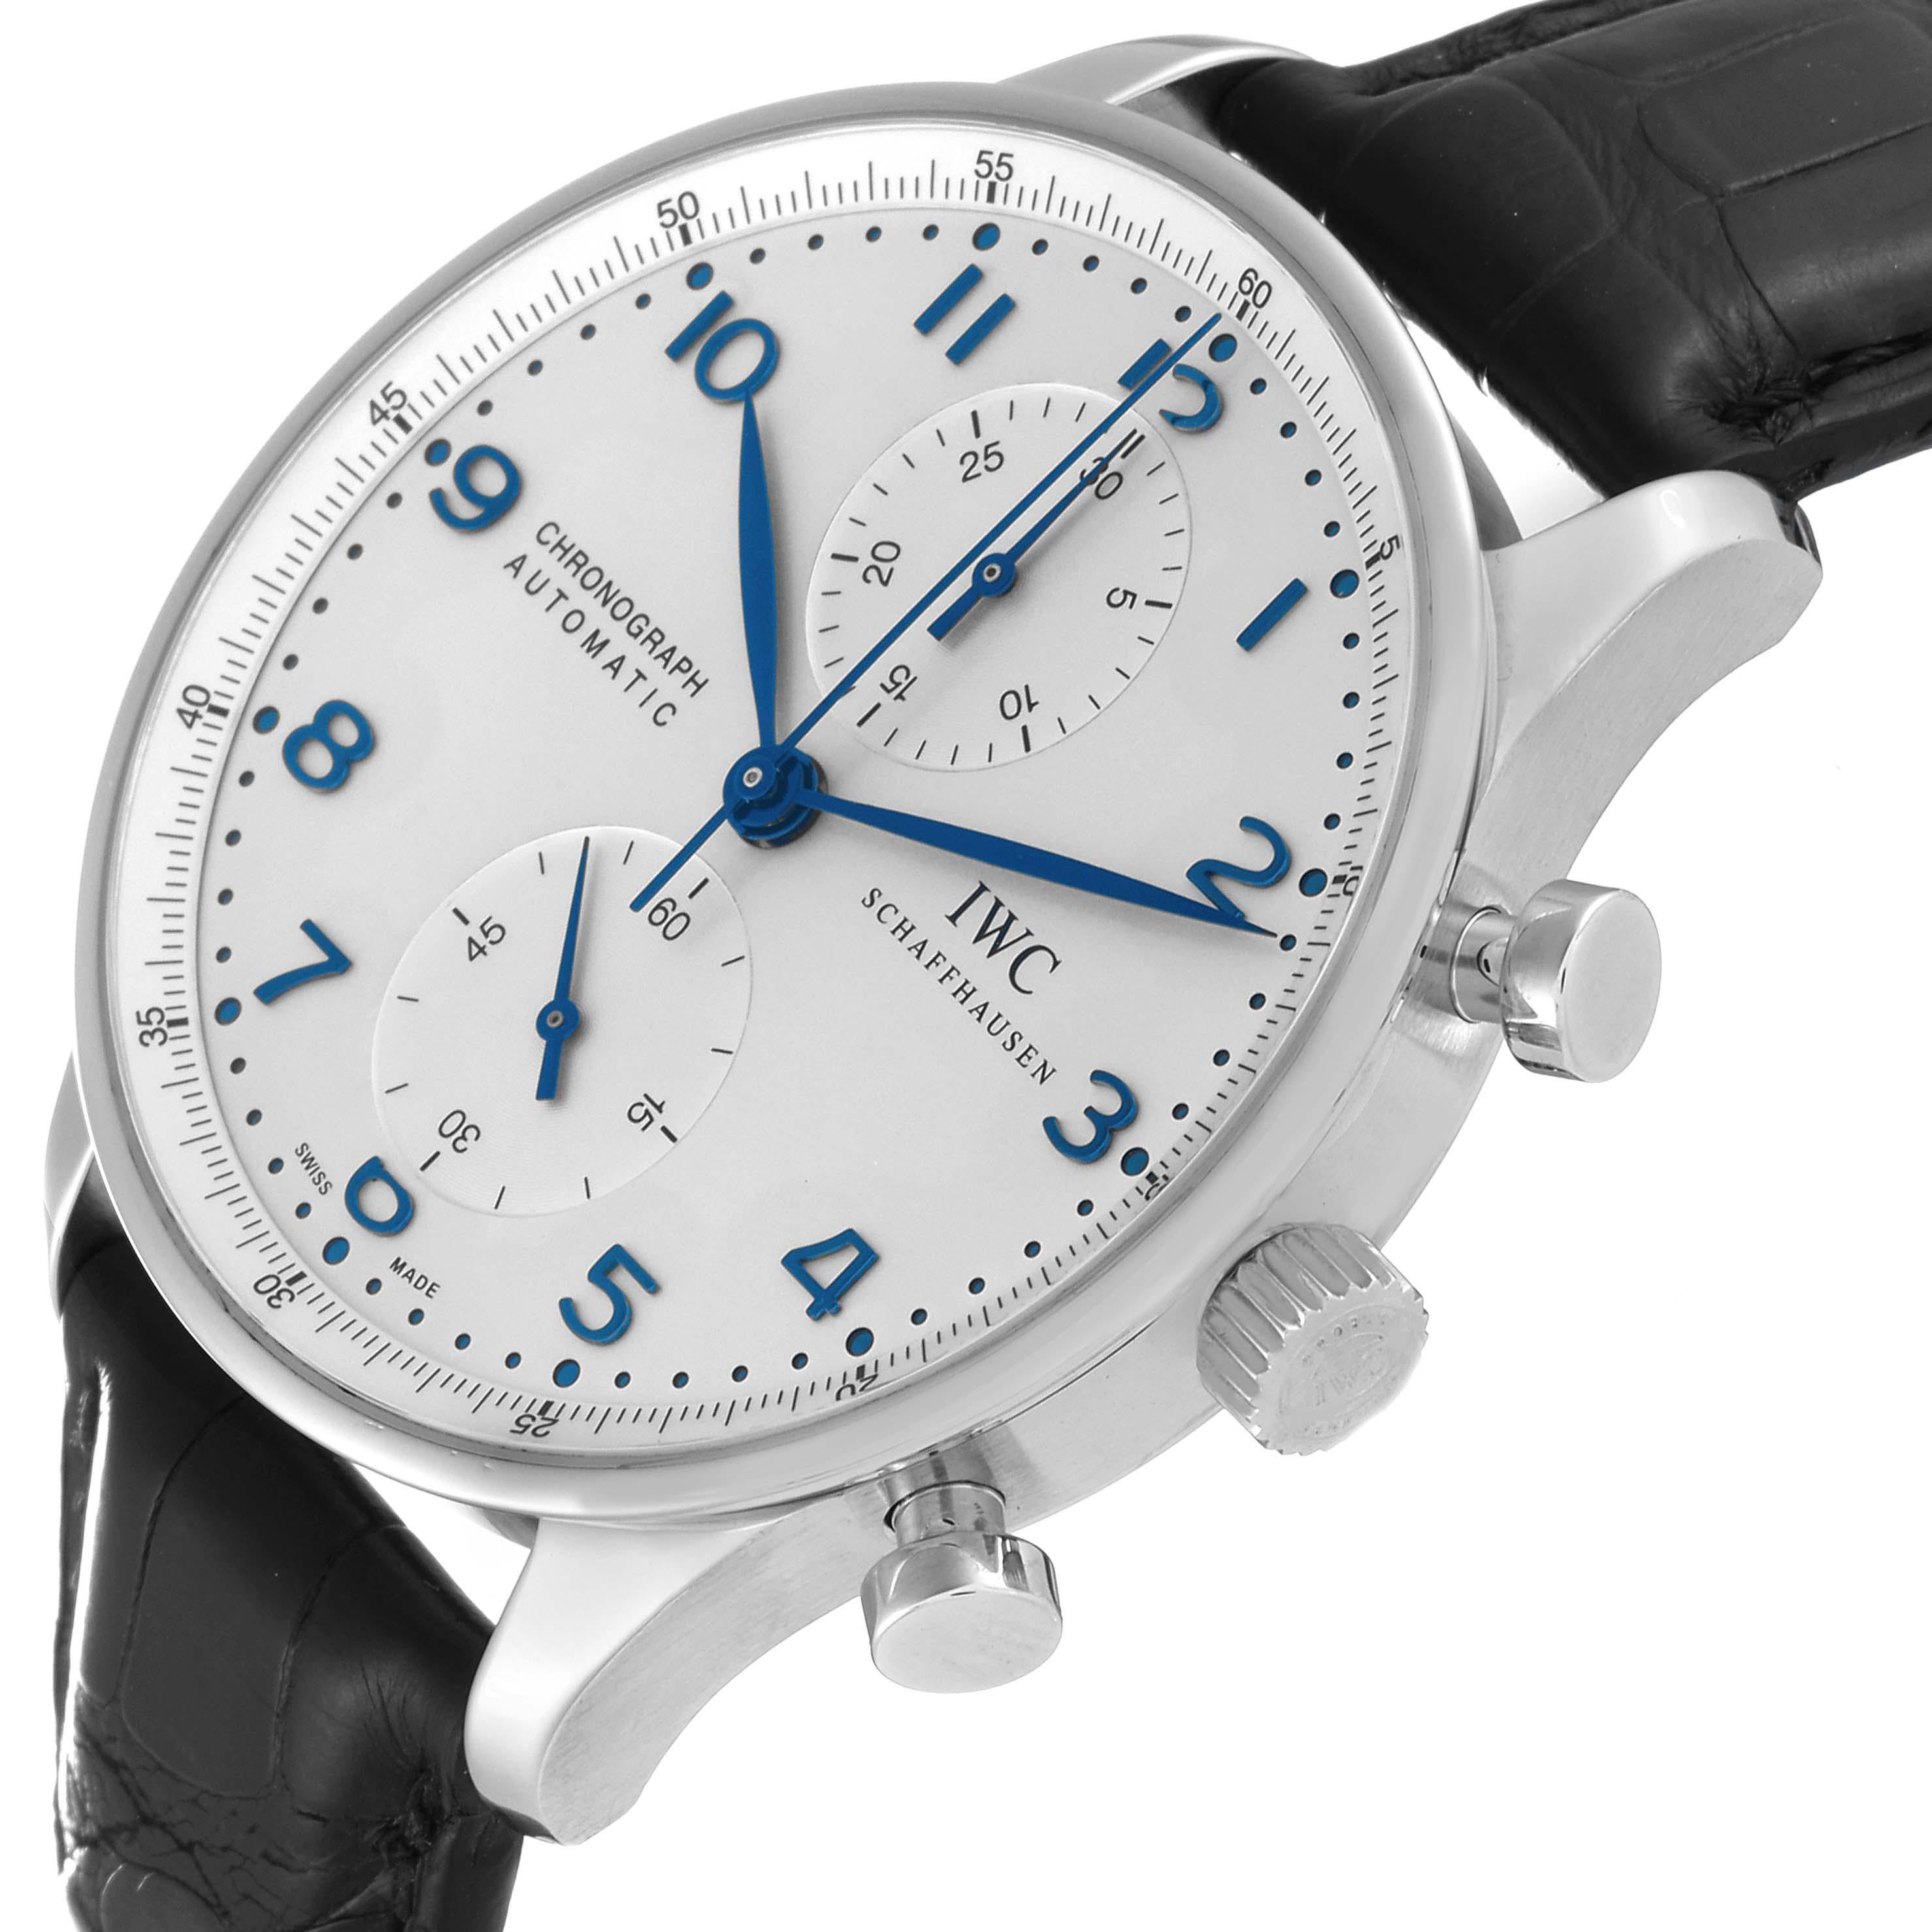 IWC Portuguese Chrono Silver Dial Blue Hands Steel Mens Watch IW371446. Automatic self-winding chronograph movement. Stainless steel case 40.9 mm in diameter. . Scratch resistant sapphire crystal. Silver dial with recessed metallic silvered